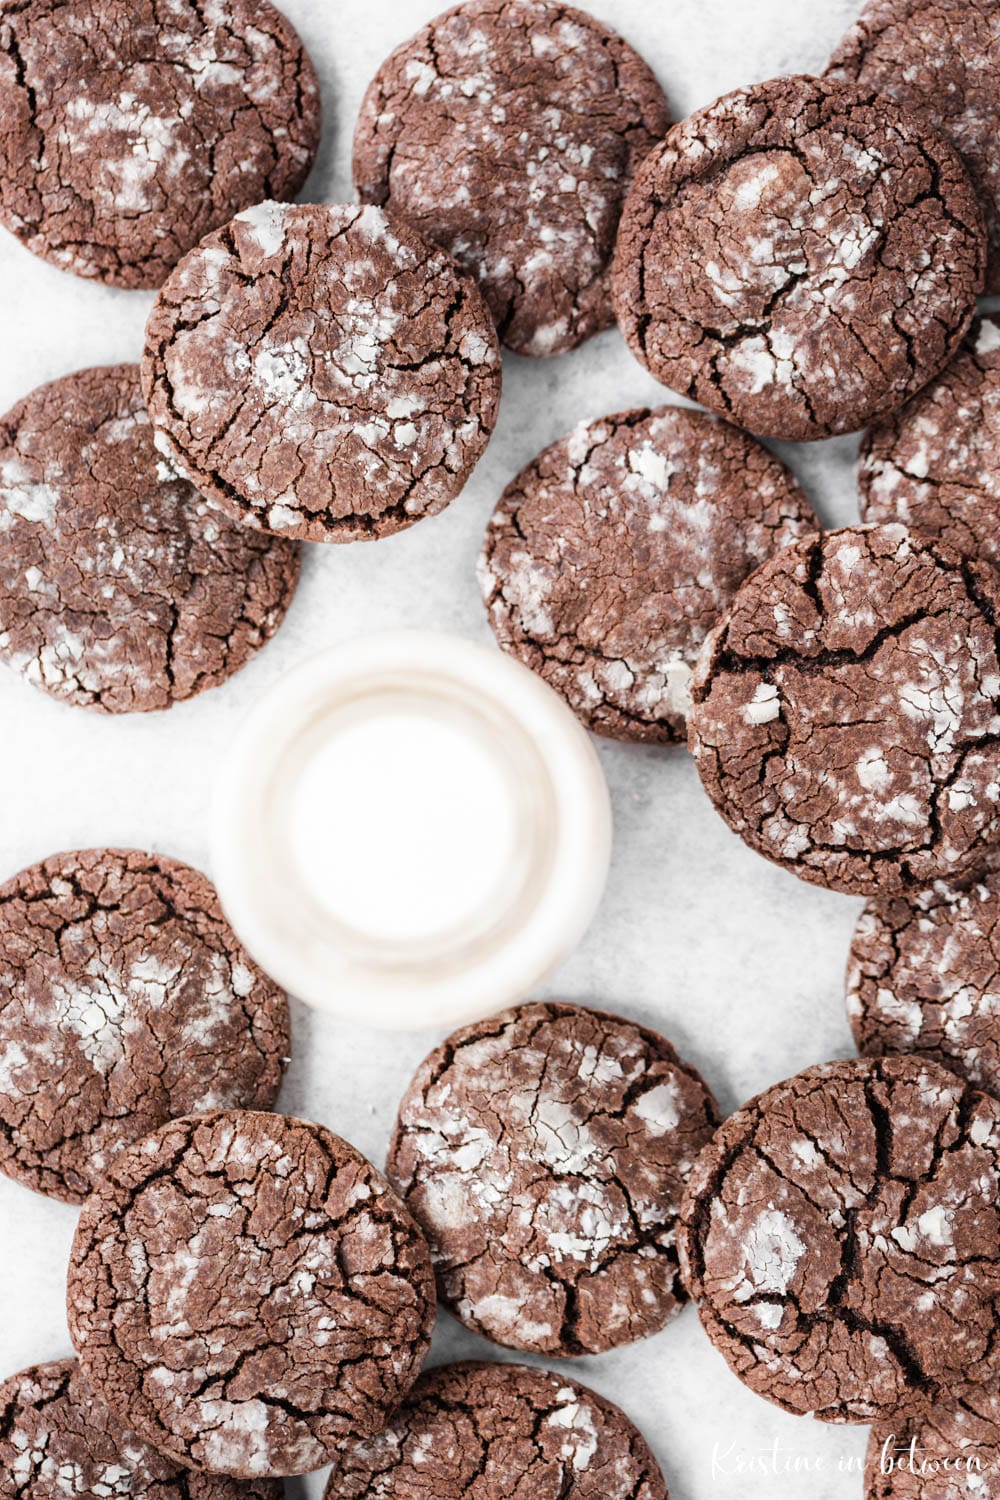 Chocolate crinkle cookies laying on parchment paper with a jar of milk next to them.